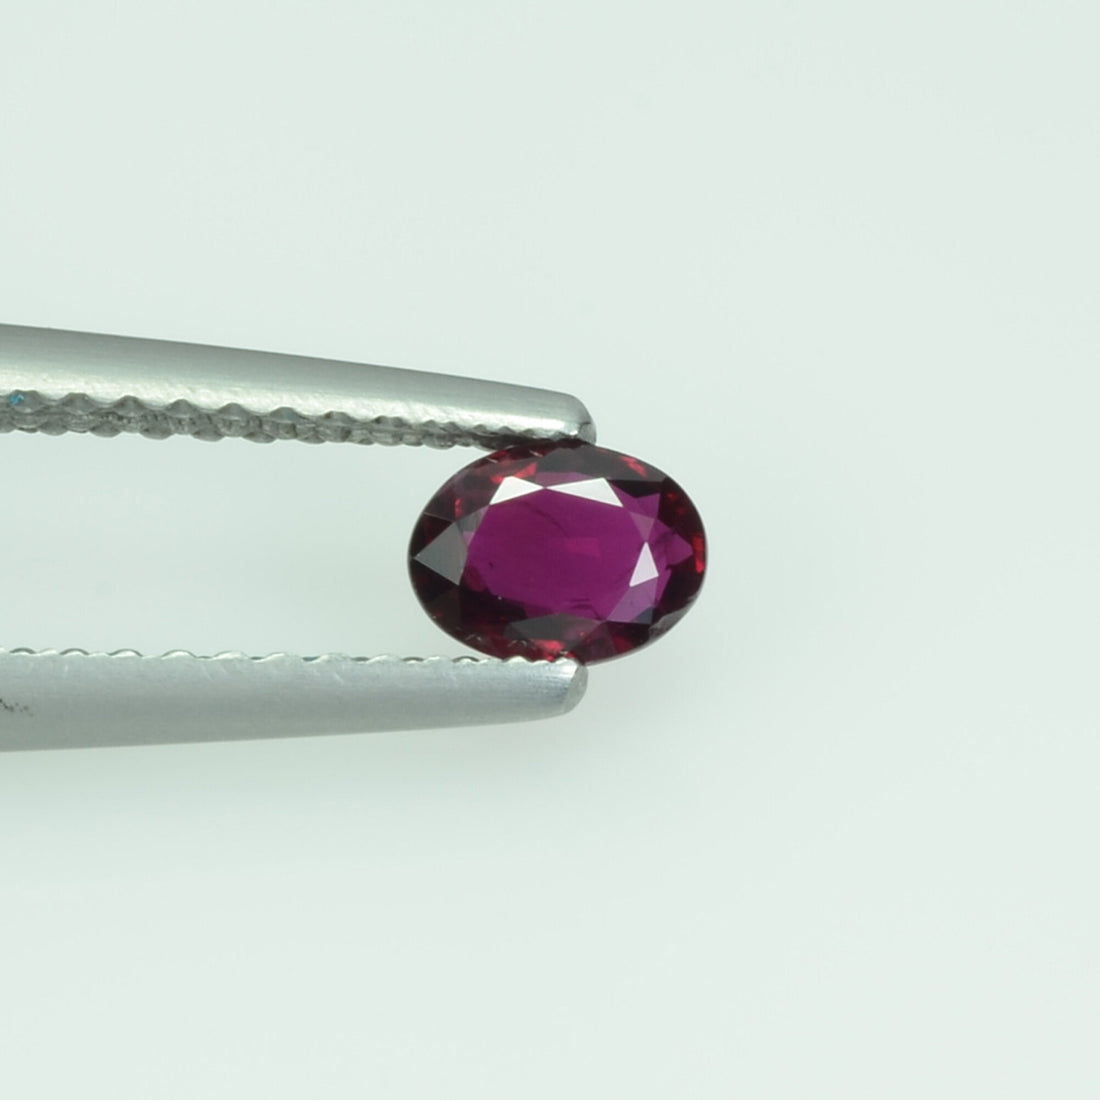 0.35 Cts Natural Thai Ruby Loose Gemstone Oval Cut